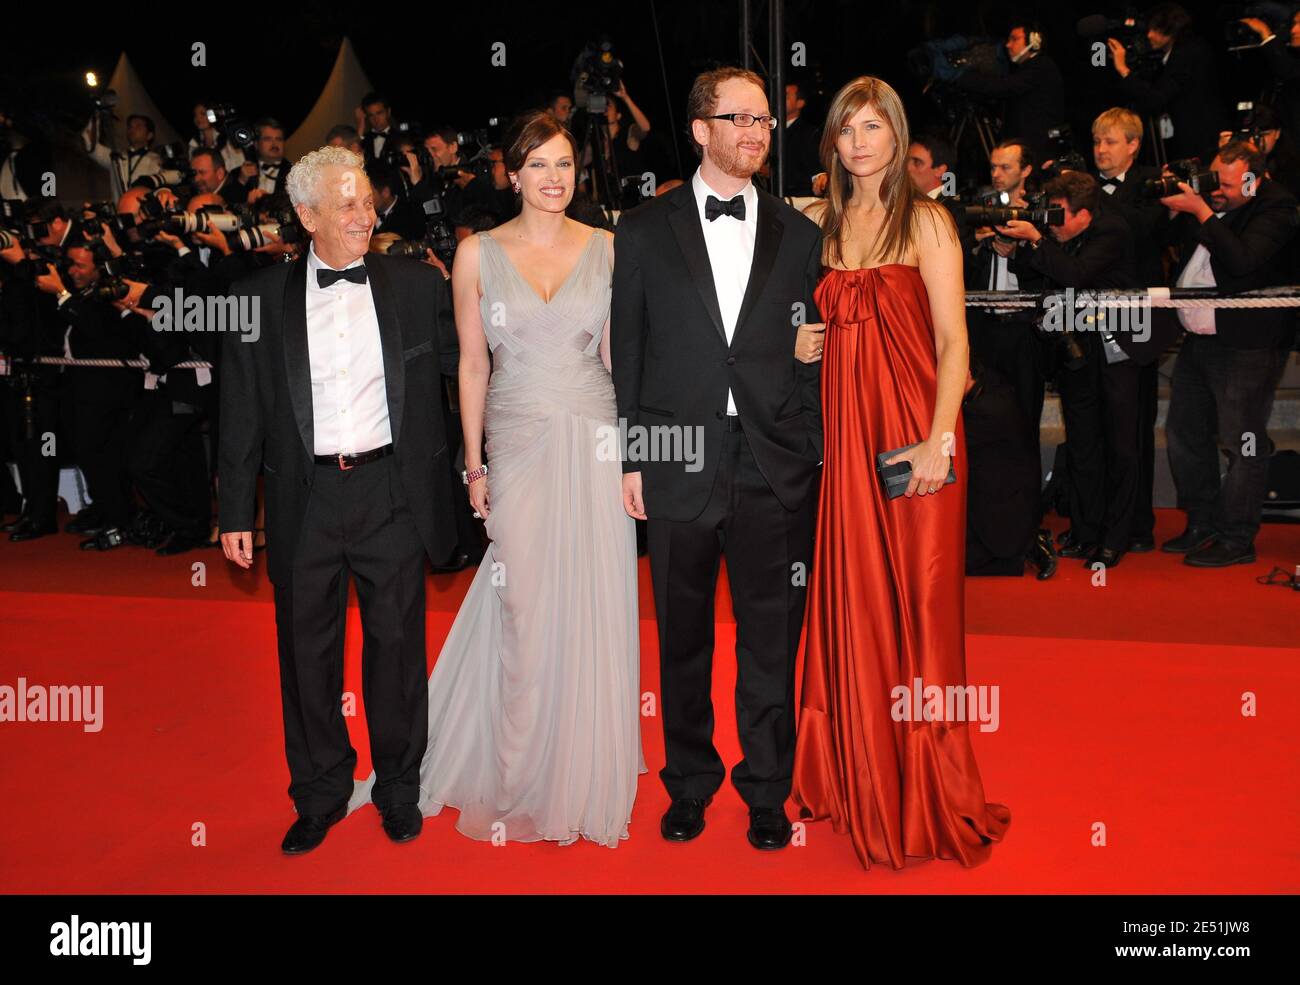 Israeli actor Moni Moshonov, Vinessa Shaw, US director James Gray and his wife Alexandra Dickson arriving at the Palais des Festivals in Cannes, Southern France, May 19, 2008, for the screening of James Gray's Two Lovers presented in competition at the 61st Cannes Film Festival. Photo by Hahn-Nebinger-Orban/ABACAPRESS.COM Stock Photo